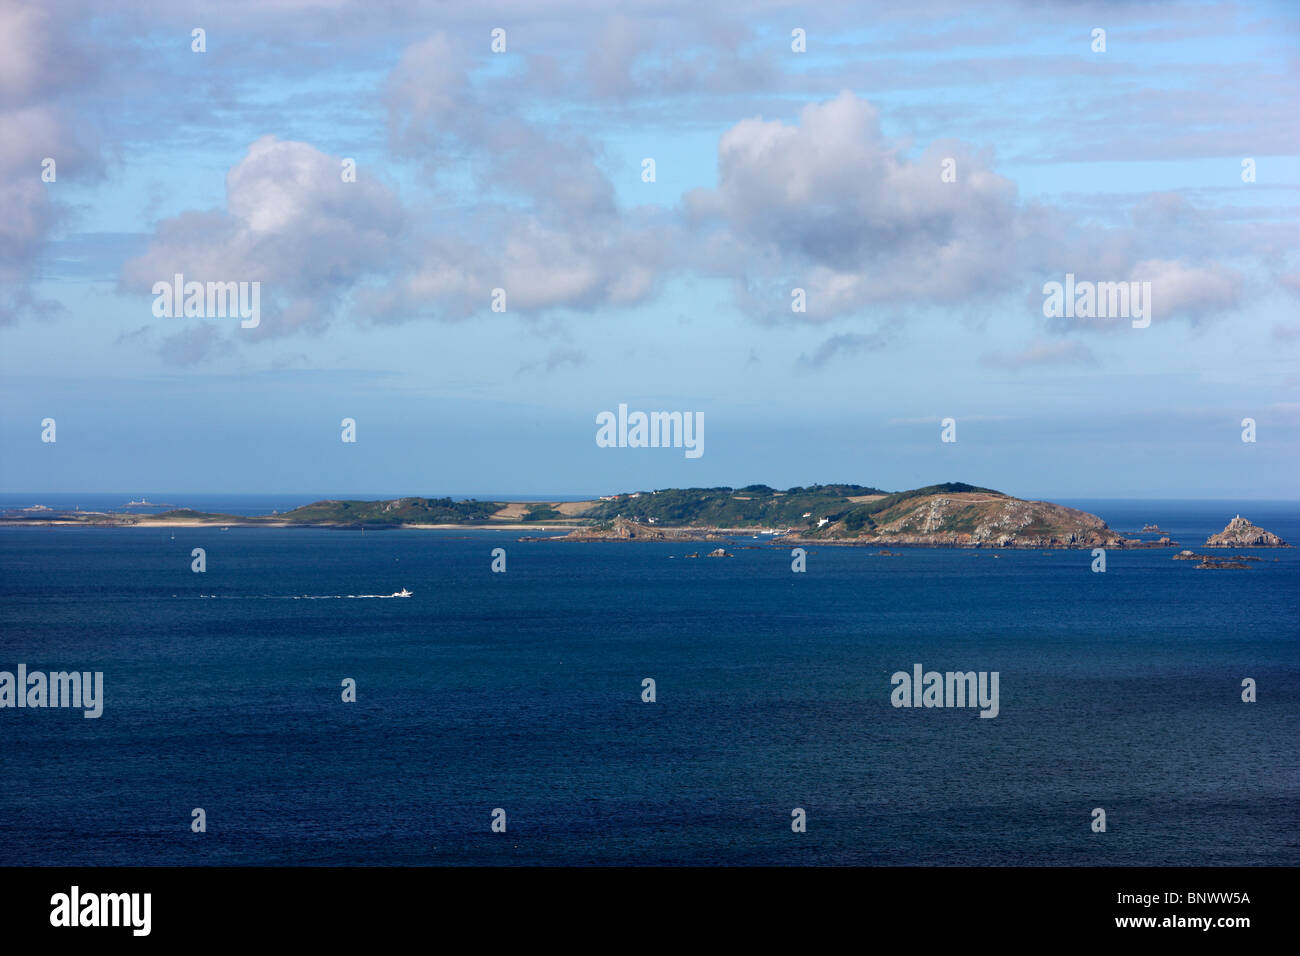 Channel Islands, view of Herm, Island near Guernsey, Channel Islands, UK, Europe Stock Photo